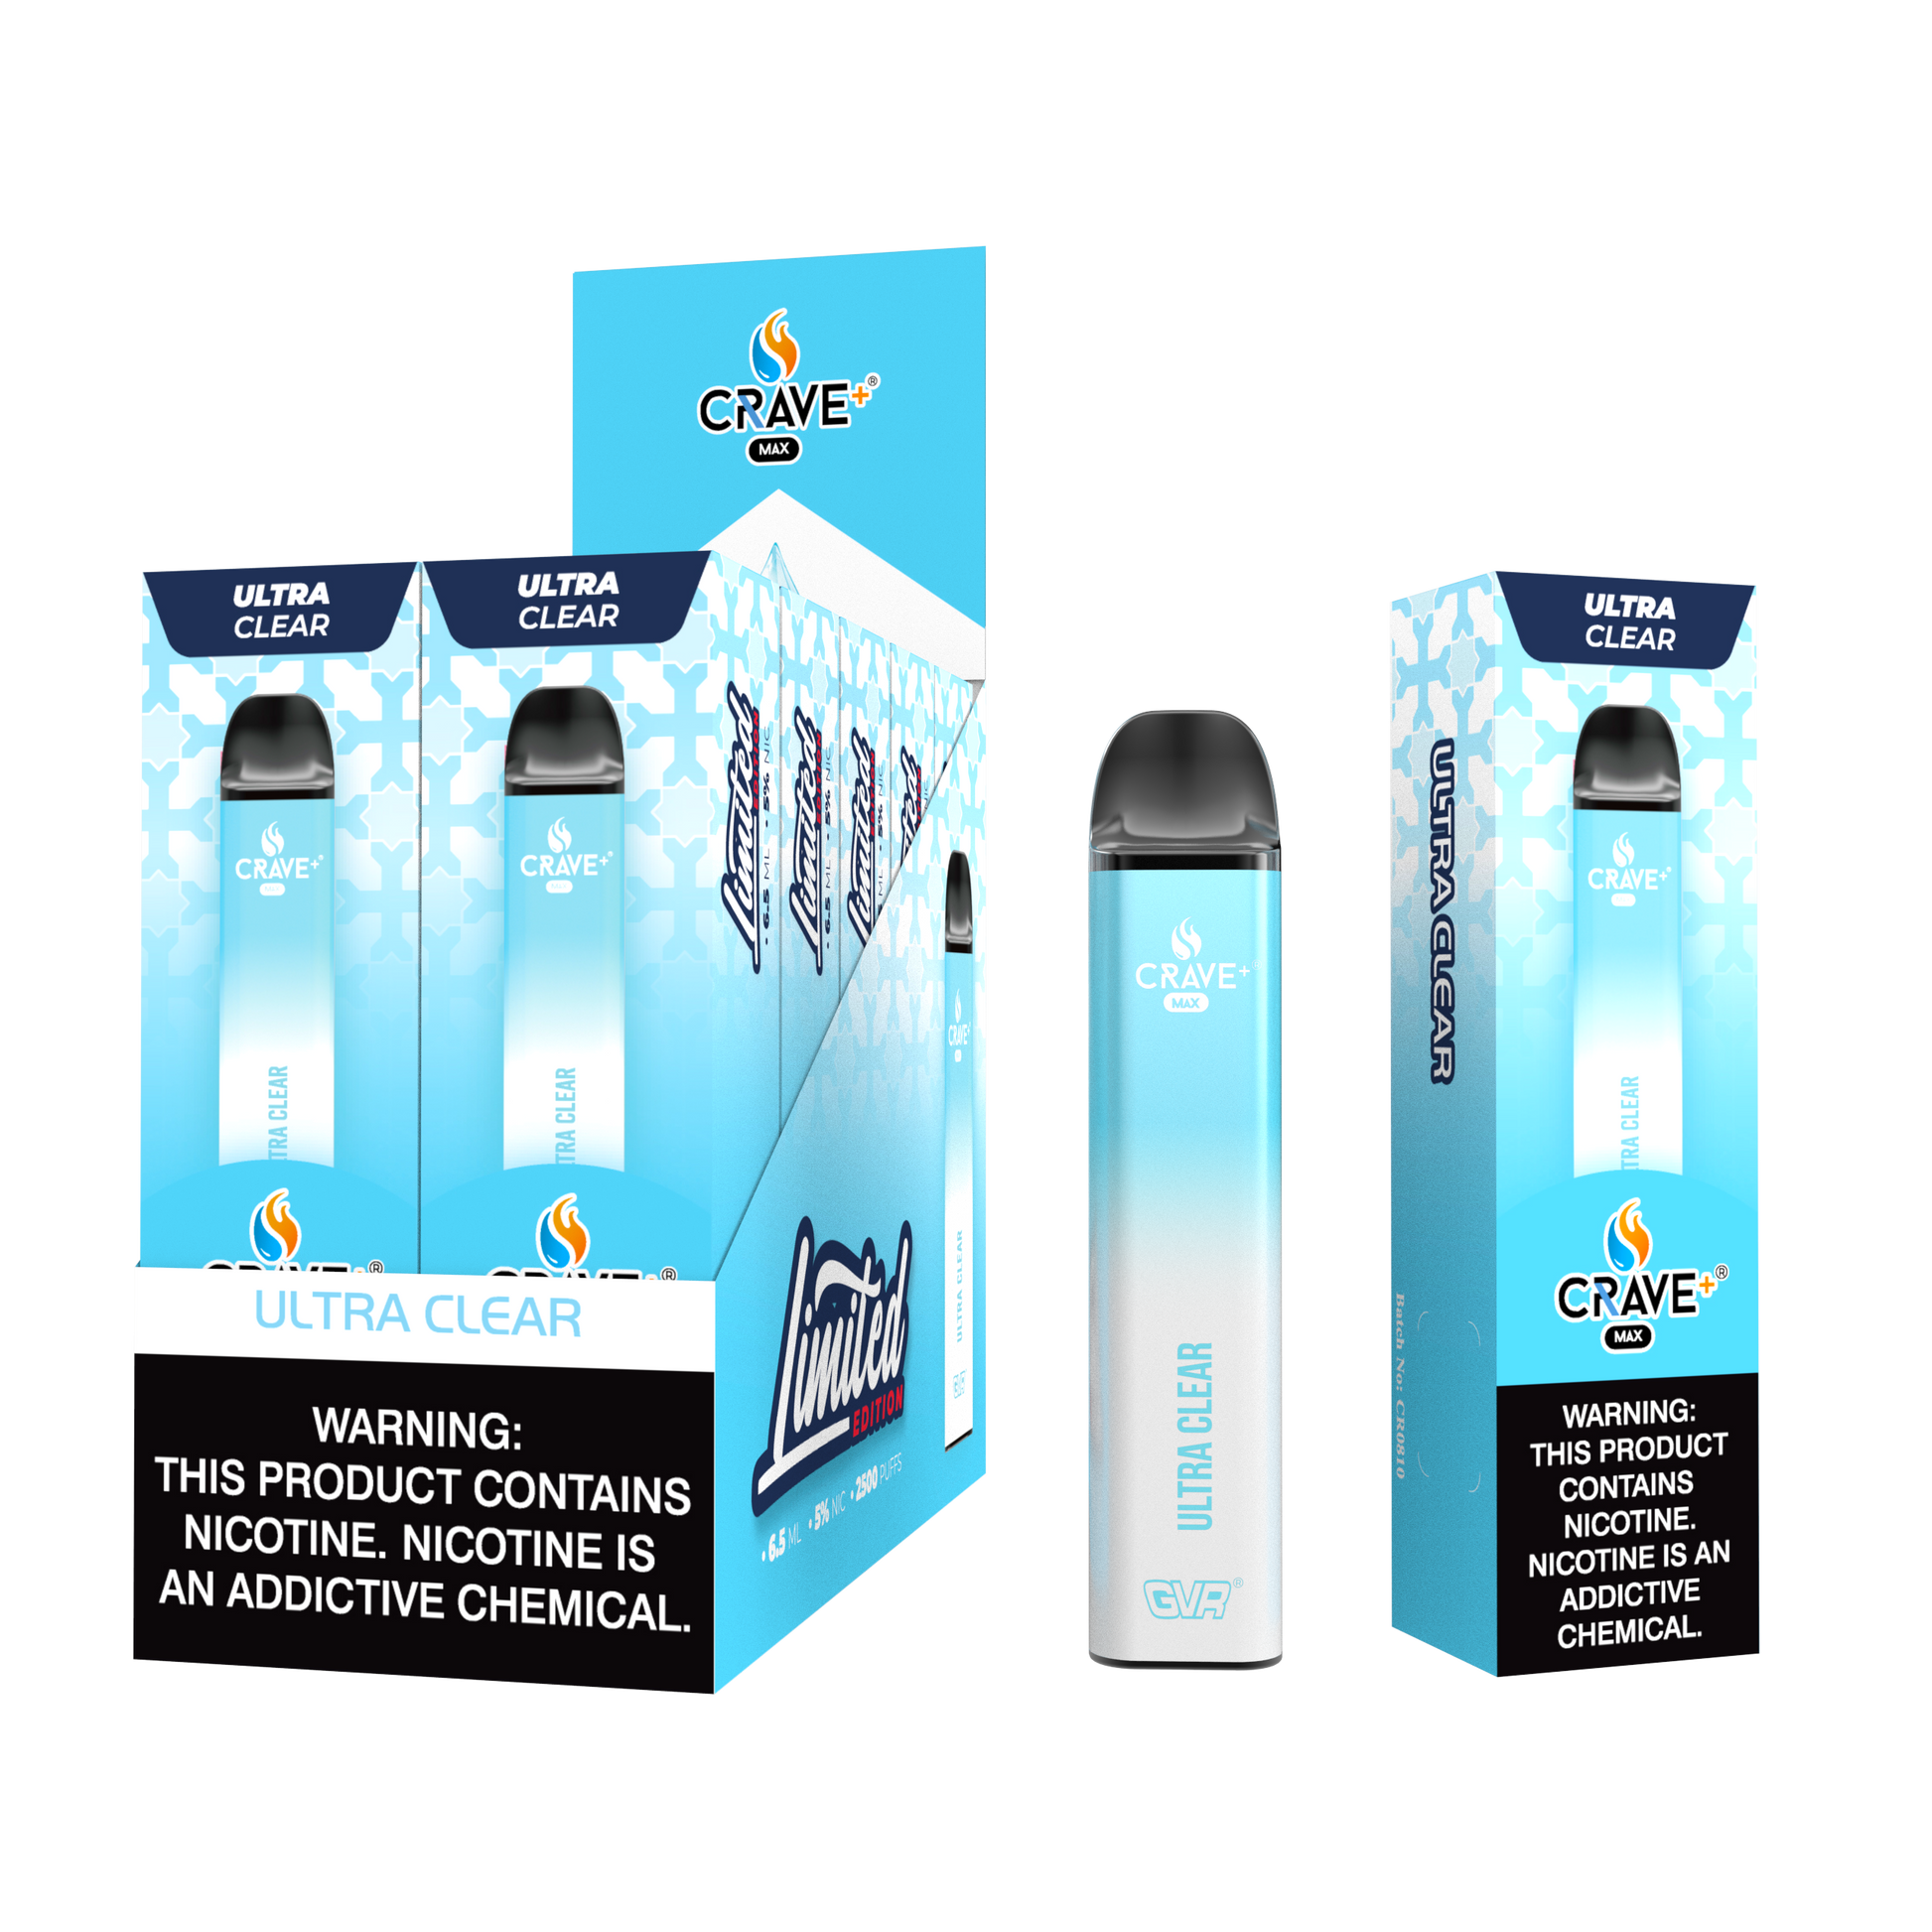 crave max, crave vape, buy crave max, crave max for sale, crave max flavors, crave flavors vape, buy crave vape online, crave max gvr, crave 2500 puffs, crave clear, crave max clear, crave clear 3%, crave clear 5%, crave max 3%, crave max 5%, crave 3%, crave 5%, crave vape clear, vape clear flavor, crave flavor clear, crave max kik, crave max limited edition, crave new clear, crave max new clear, crave max kik, crave max kalibloom clear, crave max ultra clear